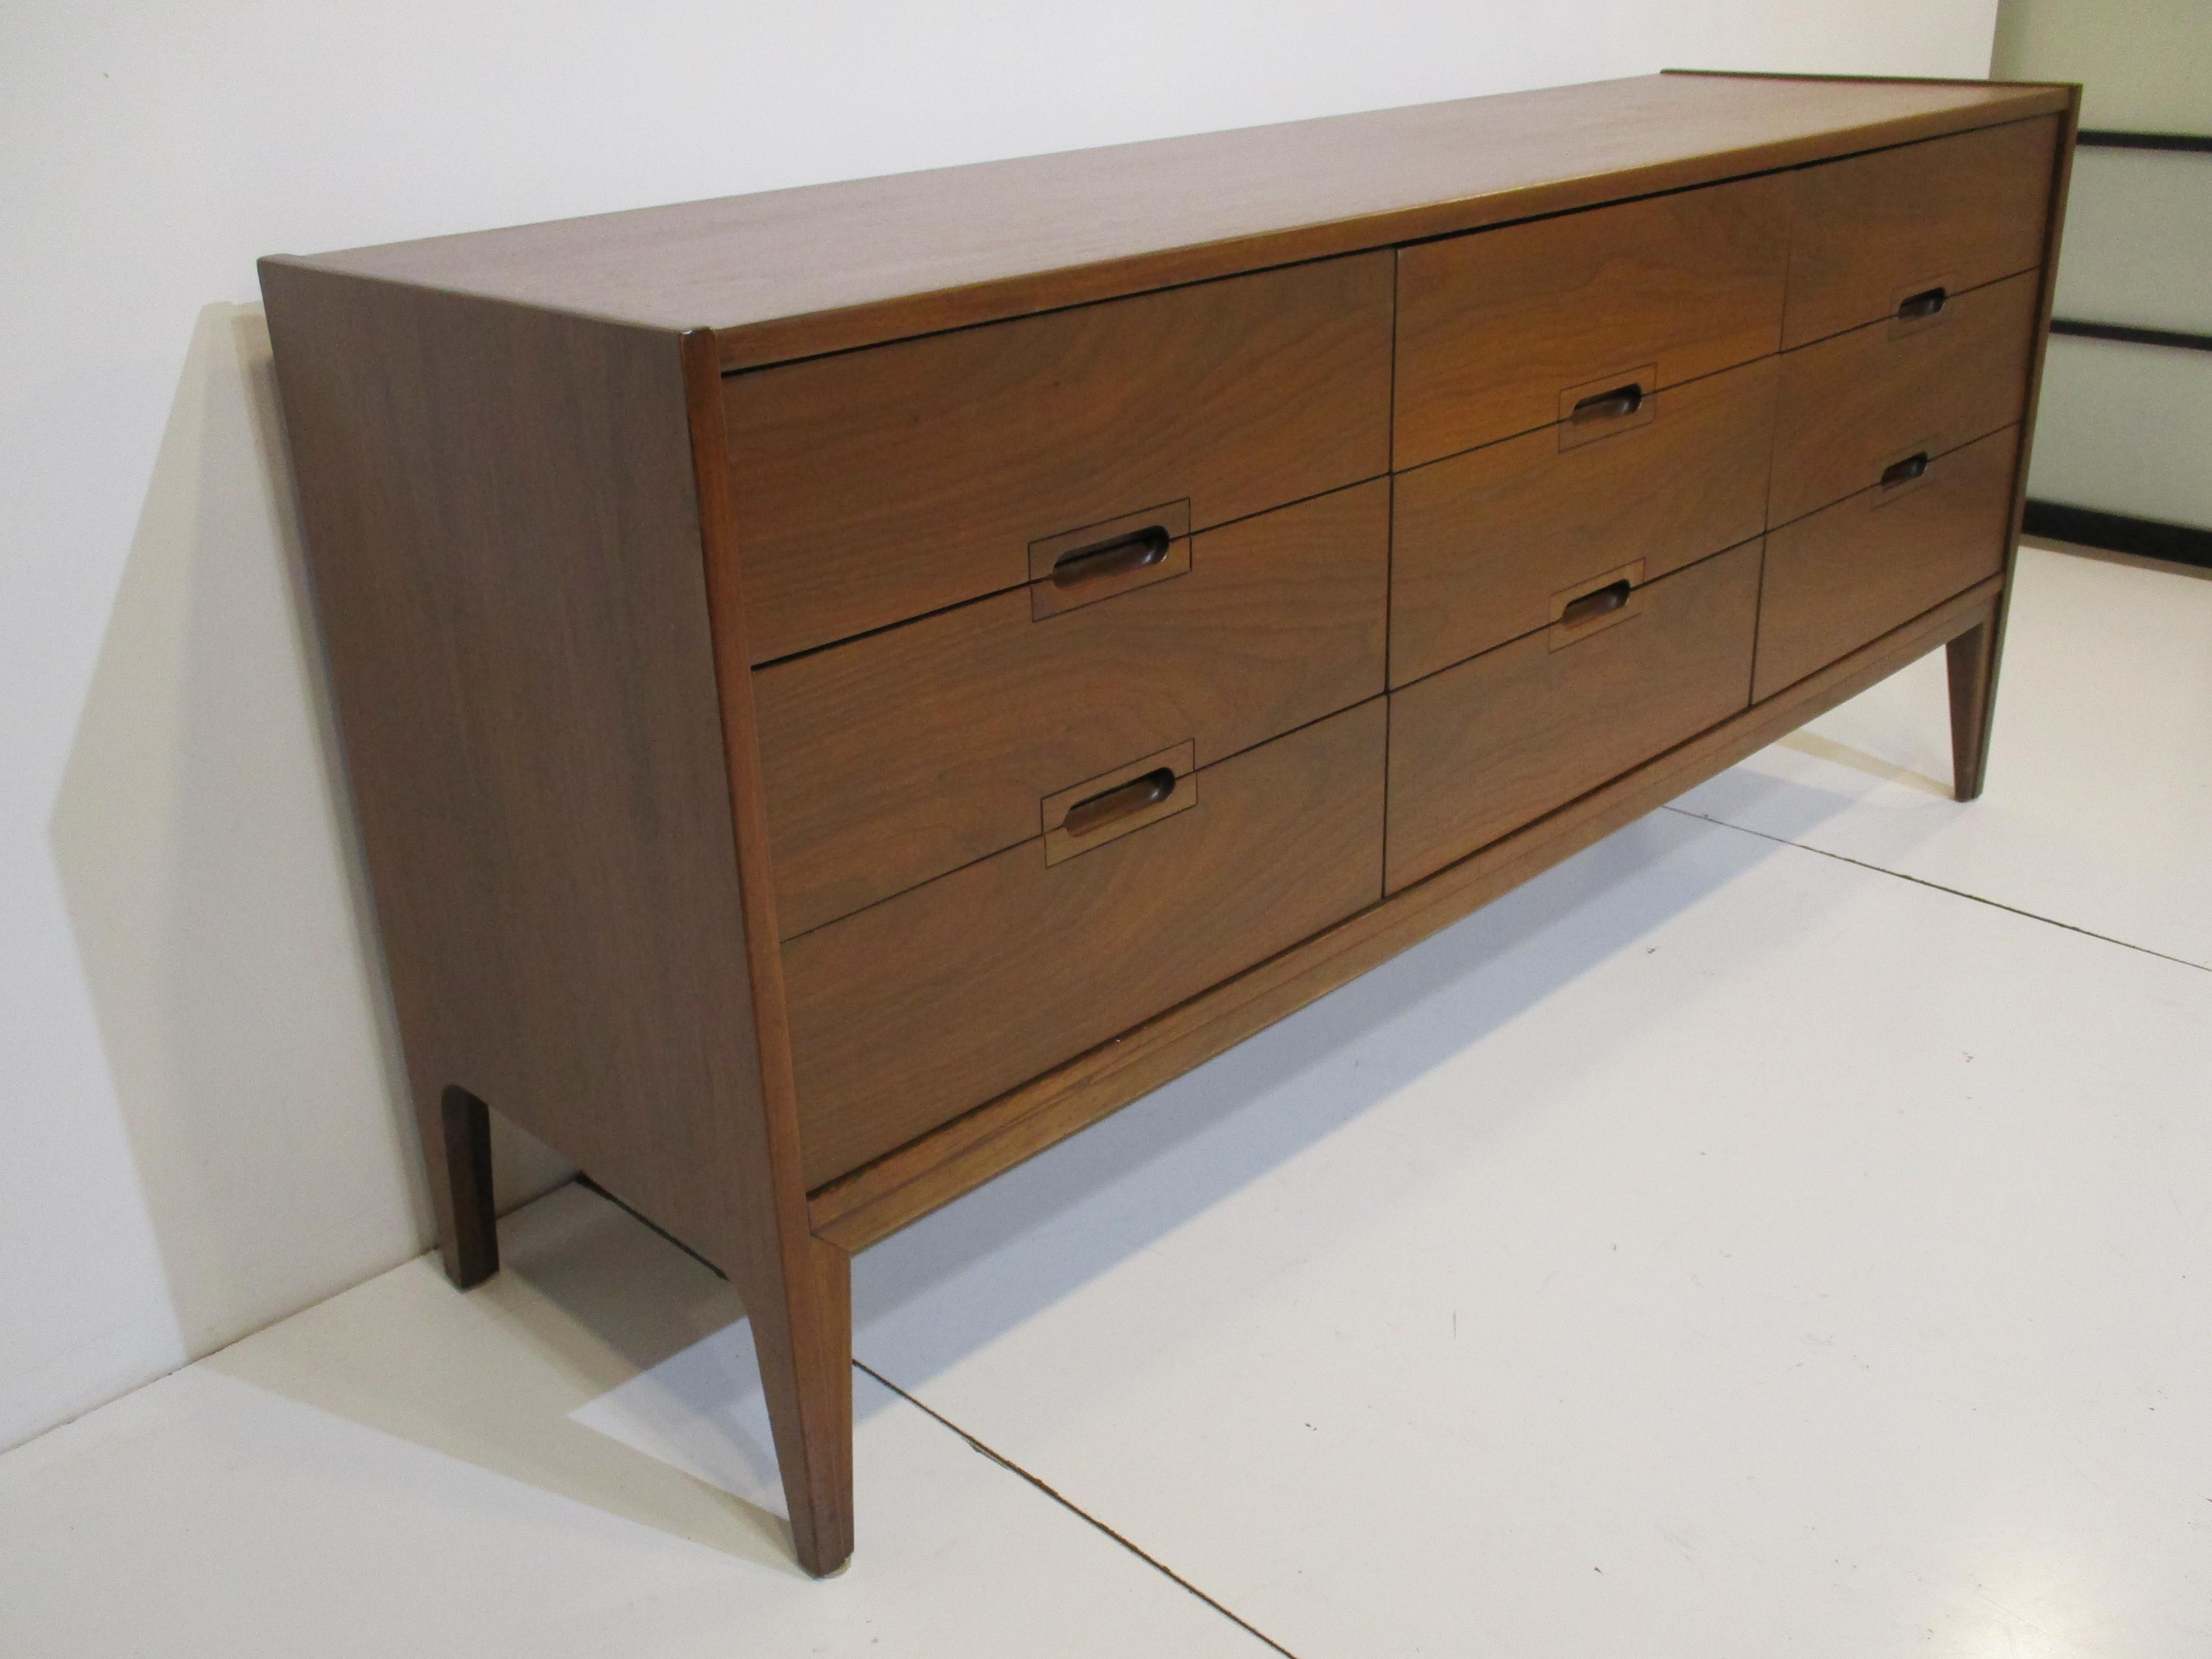 A very well grained medium dark walnut nine drawer dresser chest with flush pulls making the piece very clean and tidy. The spear styled legs have a nice cut in line detail that goes into the bottom stretcher across the frame tying the form